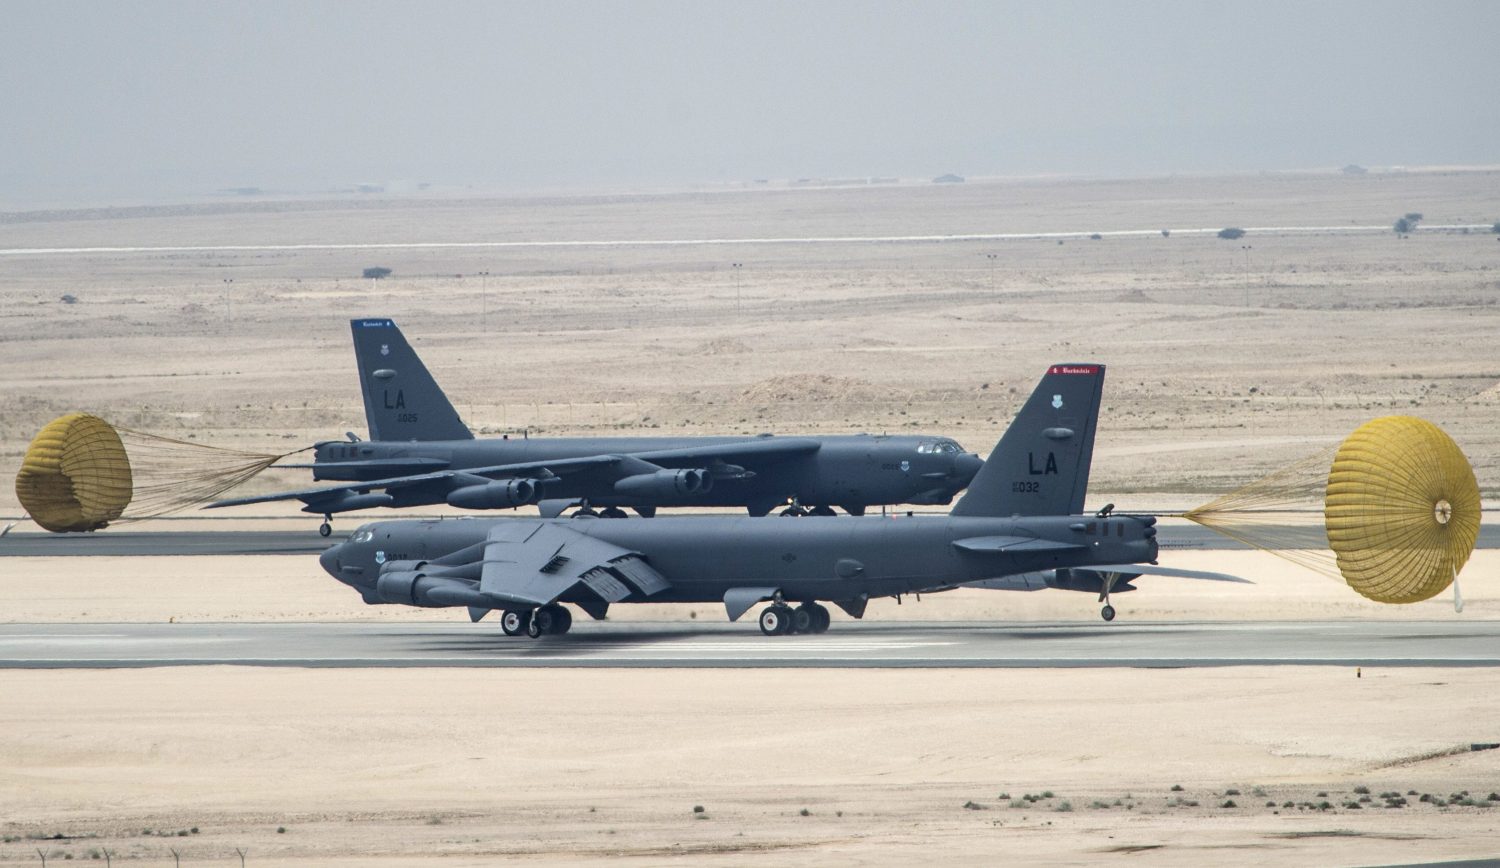 A pair of U.S. Air Force B-52 Stratofortress bombers from Barksdale Air Force Base, Louisiana, taxi after landing at Al Udeid Air Base, Qatar, April 9, 2016. The U.S. Air Force deployed B-52 bombers to Qatar on Saturday to join the fight against Islamic State in Iraq and Syria, the first time they have been based in the Middle East since the end of the Gulf War in 1991. REUTERS/U.S. Air Force/Staff Sgt. Corey Hook/Handout via Reuters THIS IMAGE HAS BEEN SUPPLIED BY A THIRD PARTY. IT IS DISTRIBUTED, EXACTLY AS RECEIVED BY REUTERS, AS A SERVICE TO CLIENTS. FOR EDITORIAL USE ONLY. NOT FOR SALE FOR MARKETING OR ADVERTISING CAMPAIGNS - RTX29786